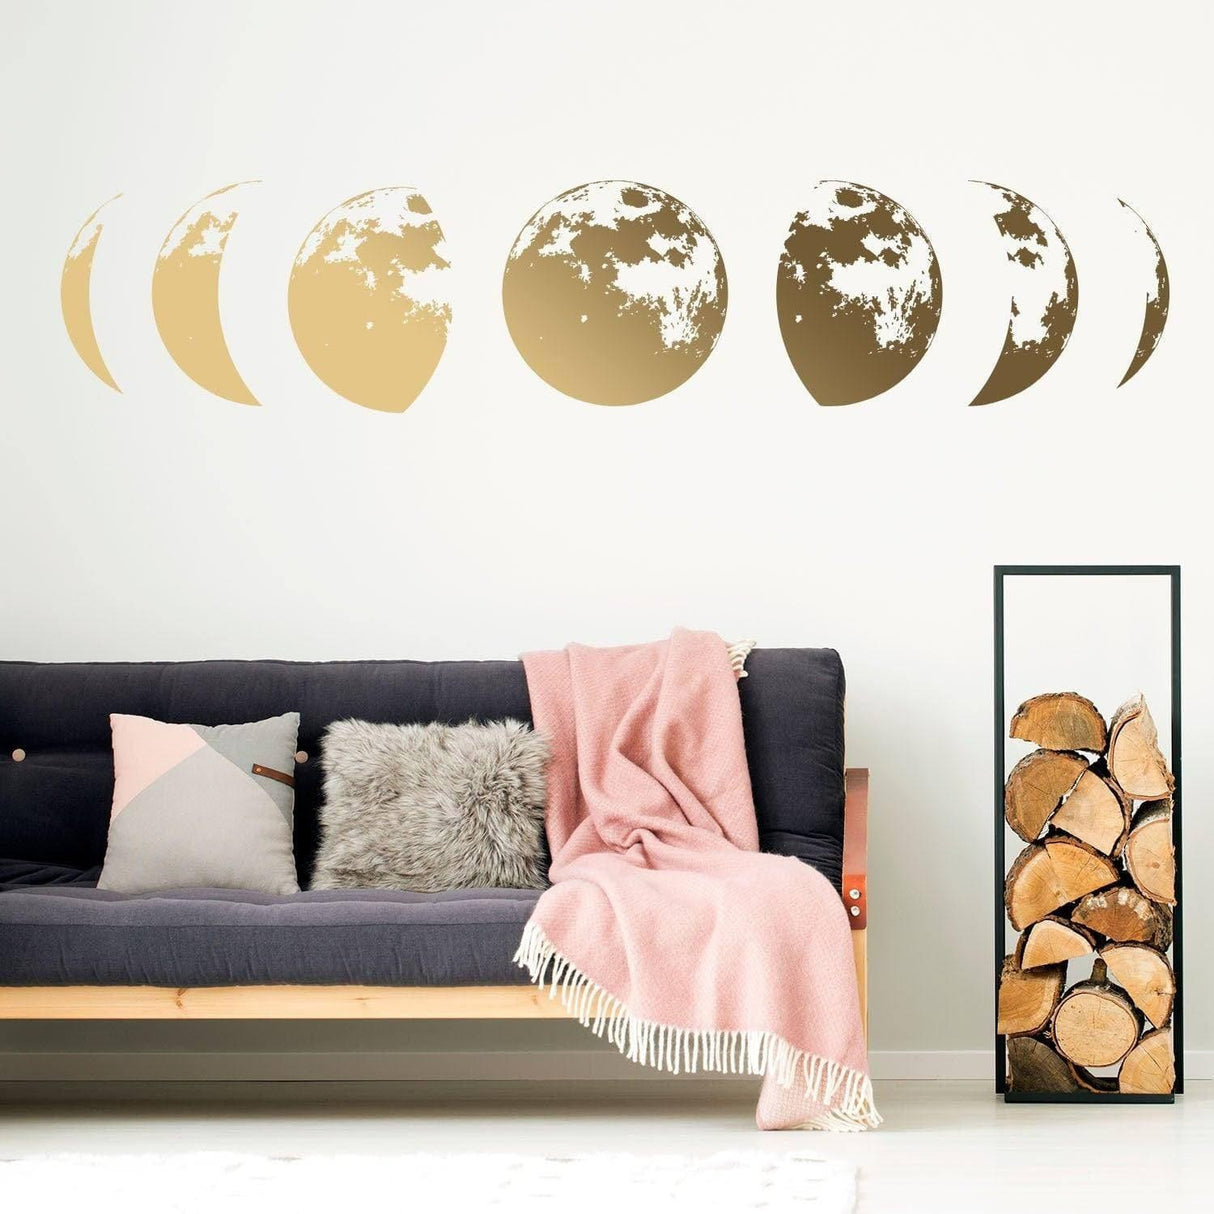 Moon Phases Wall Decor Decal - Gold Home Art Living Room Bedroom Sticker Decoration - Silver Phase Cycle Nursery Lunar Crescent Vinyl Mural - Decords